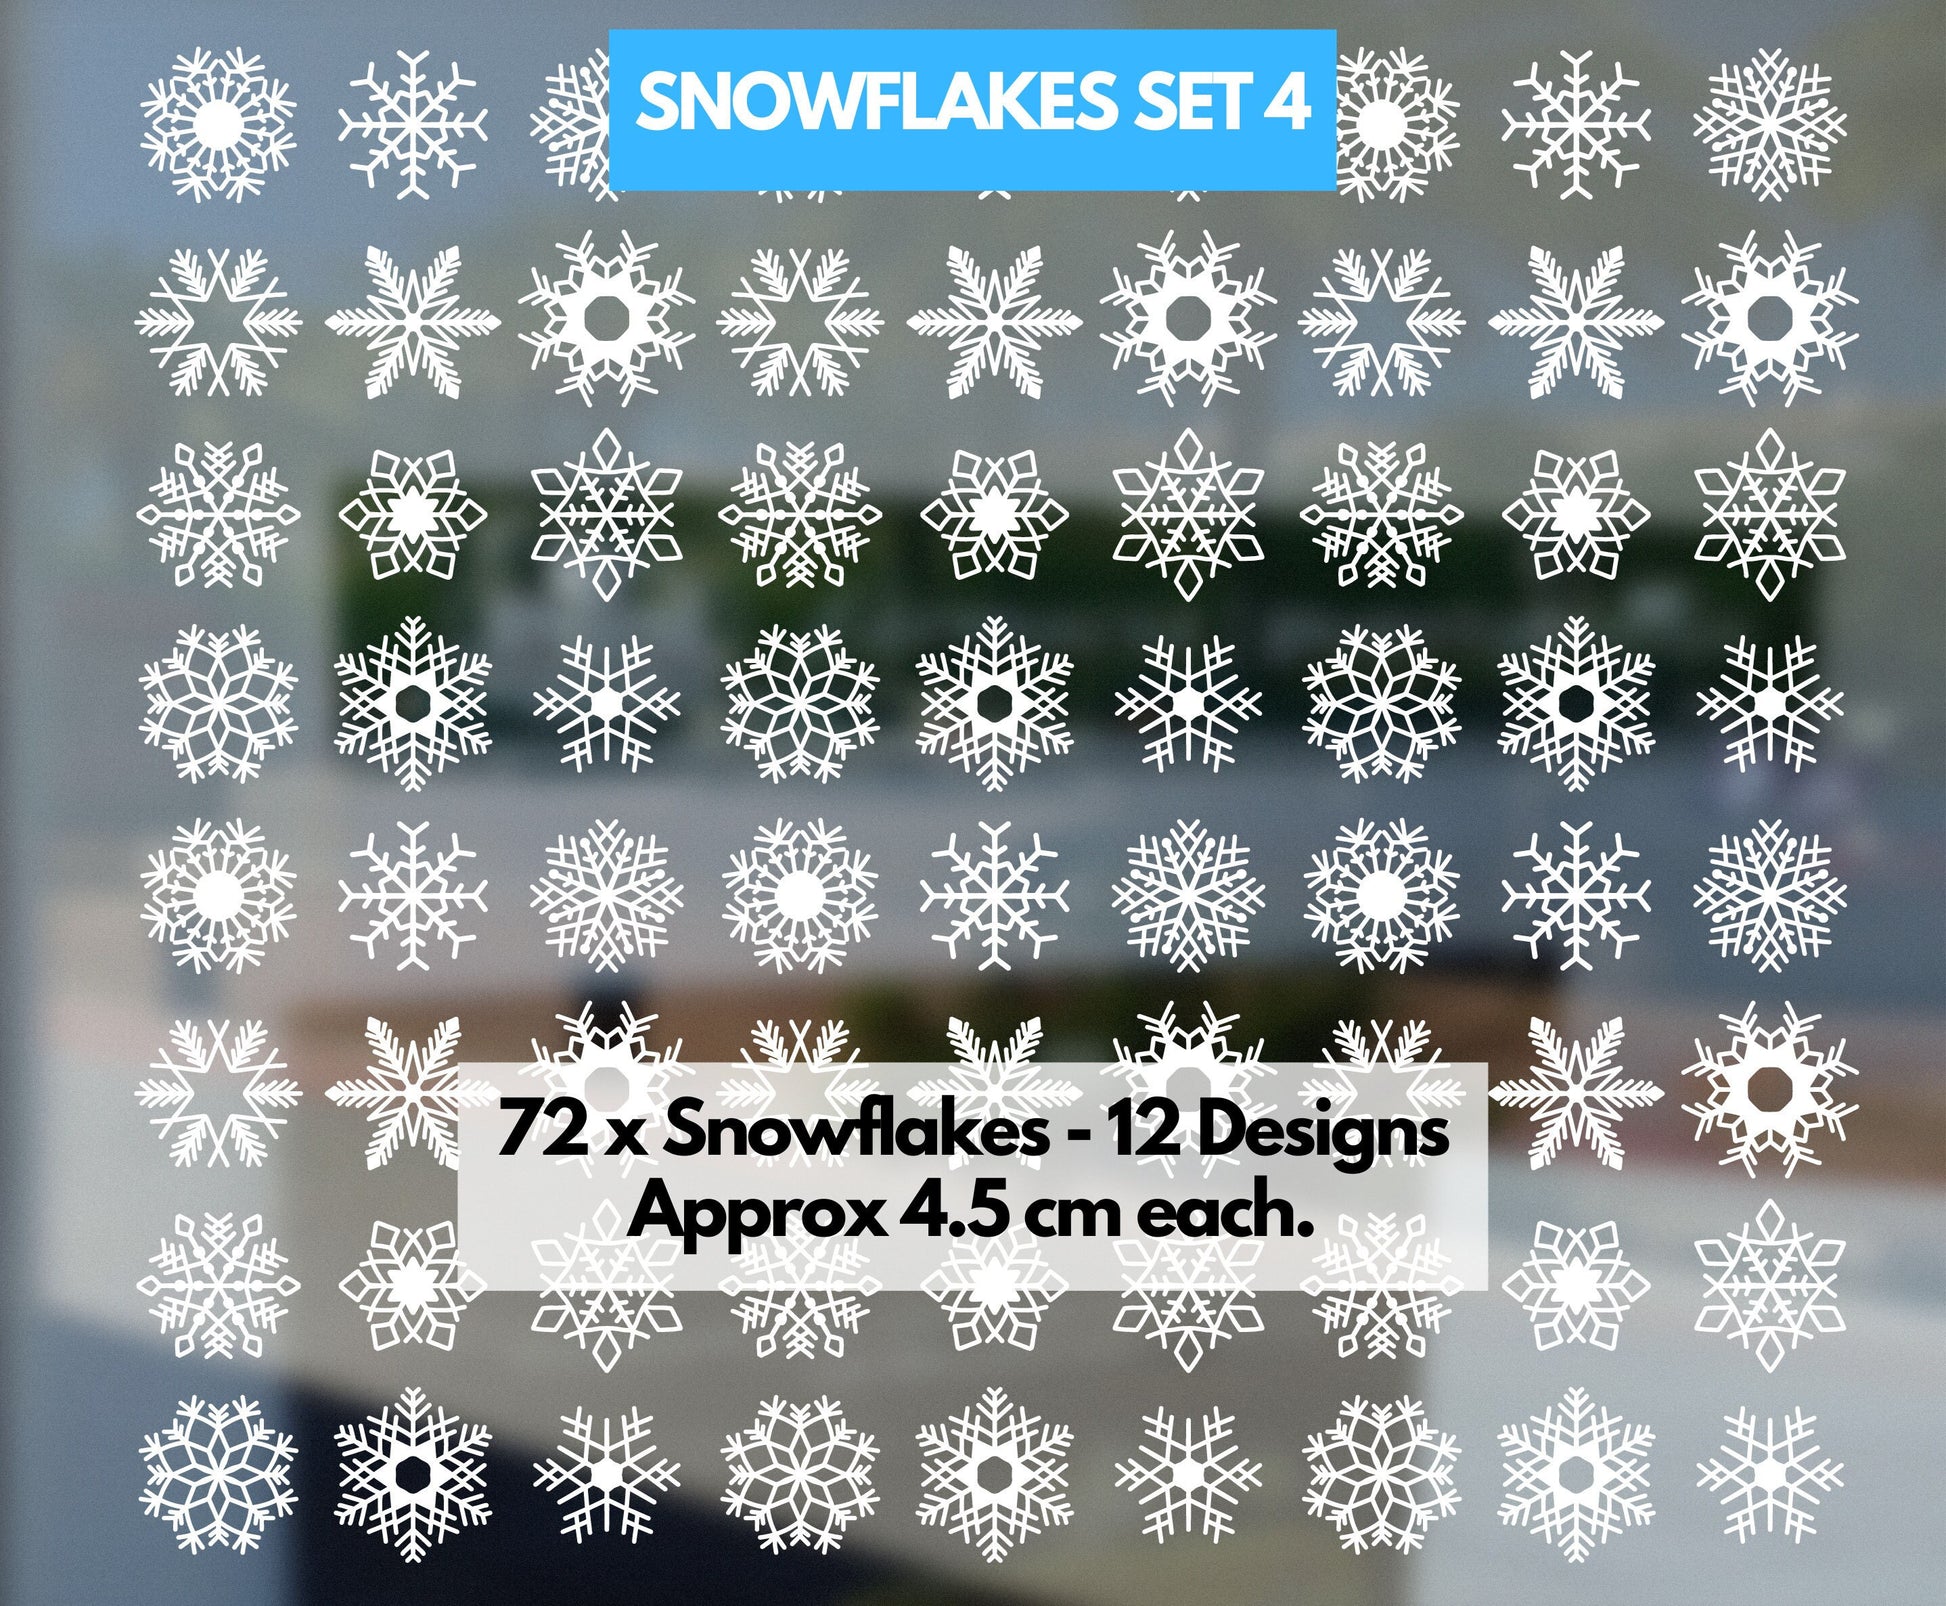 72 Snowflake Window Stickers, High Quality Christmas Window Decals, Snowflake Stickers For Windows, Home, Office, Shop Xmas